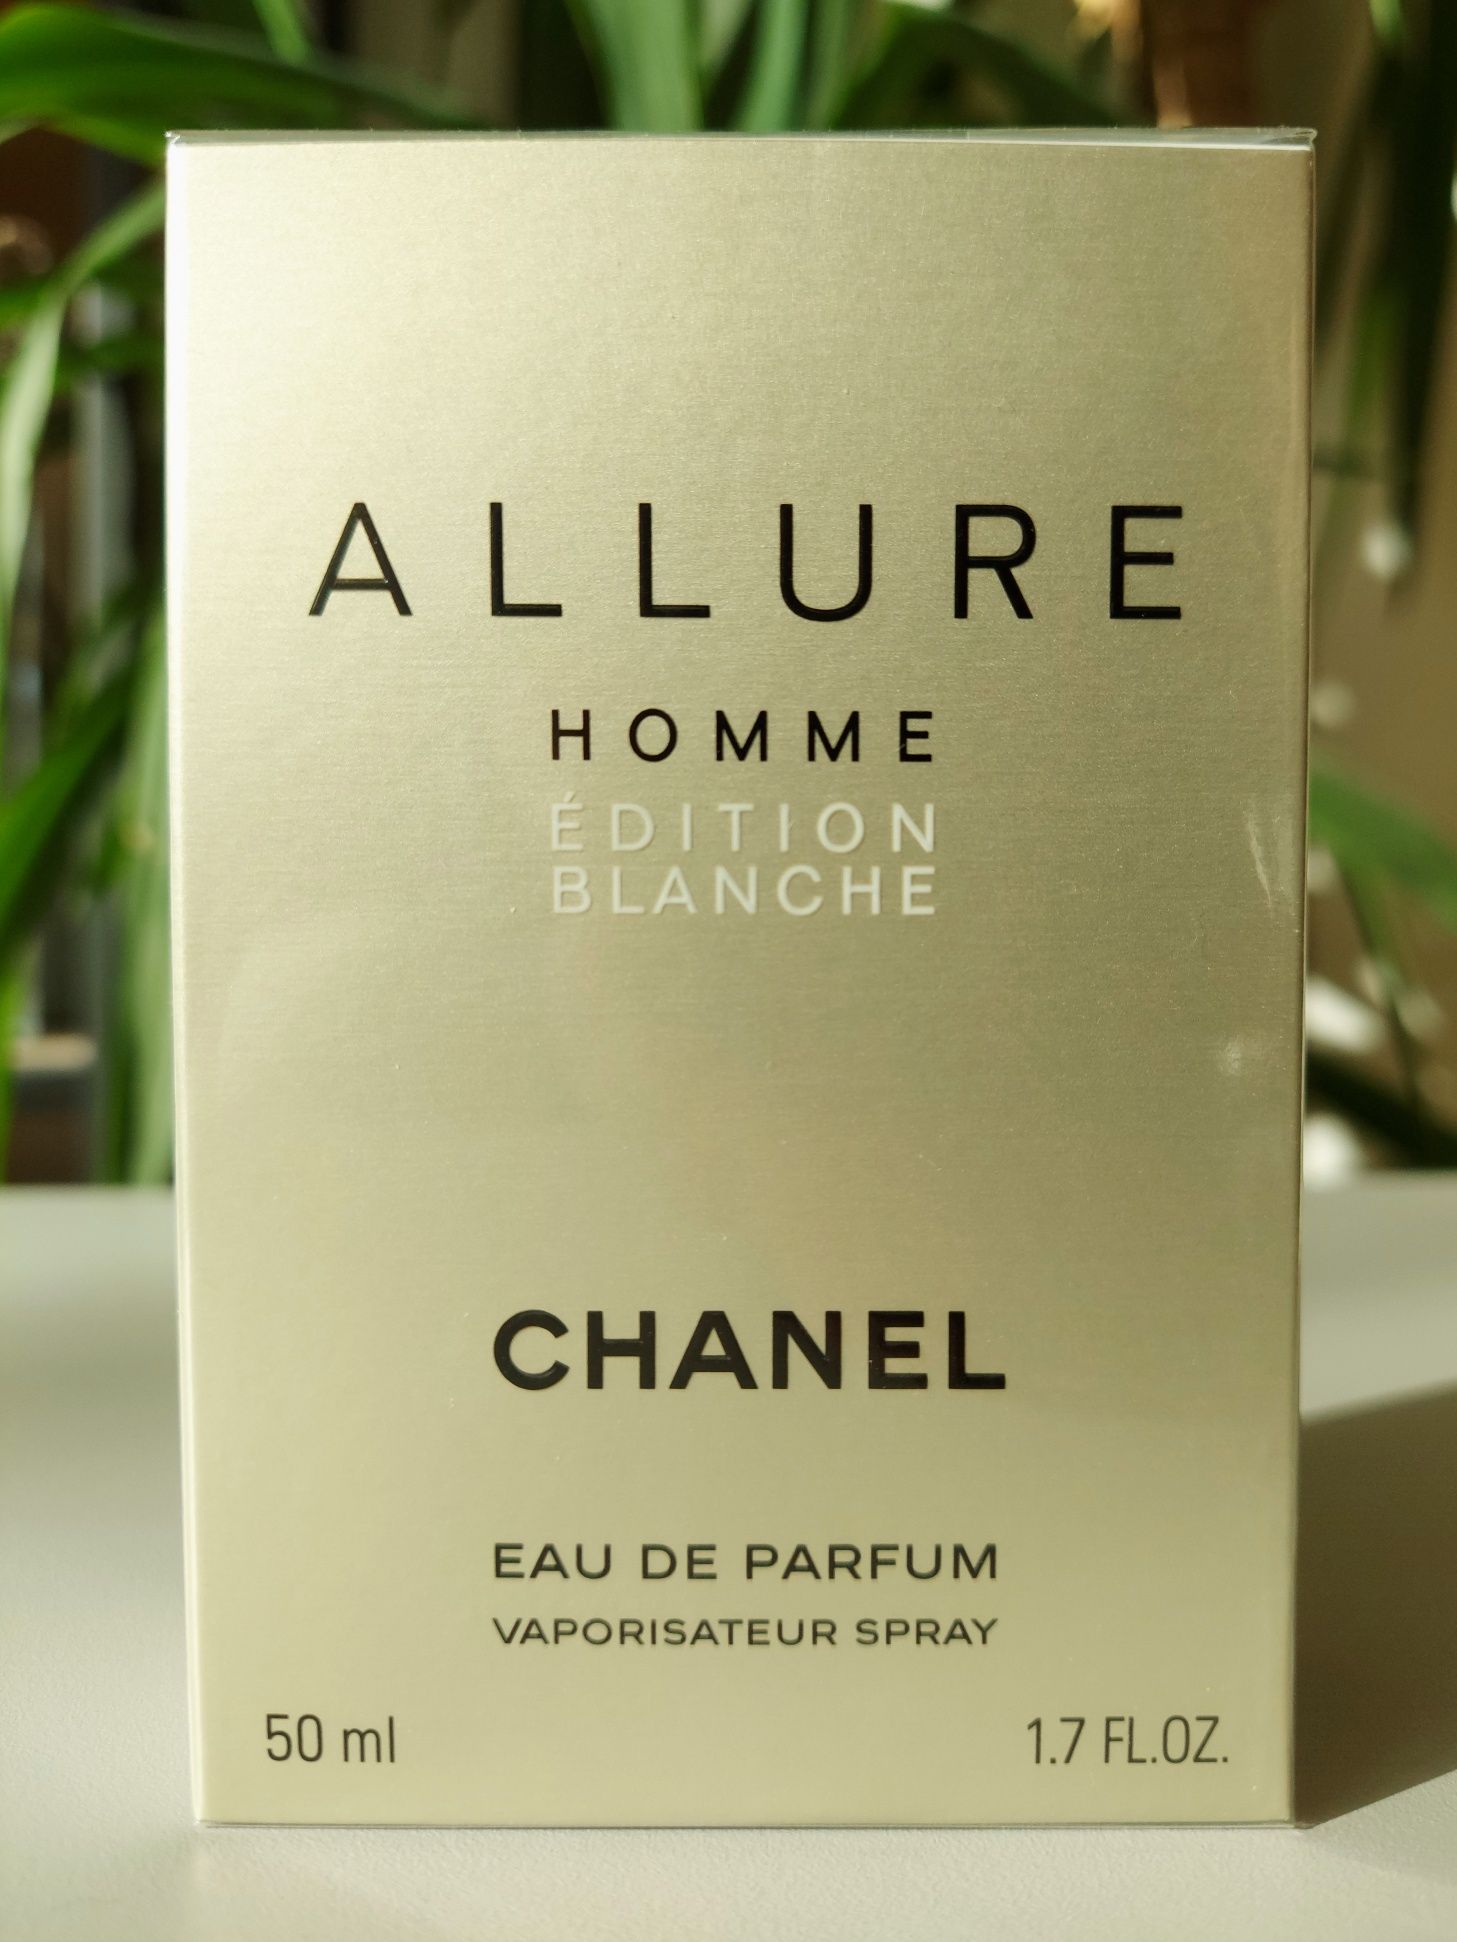 CHANEL Allure Homme Edition Blanche EDP 50ml